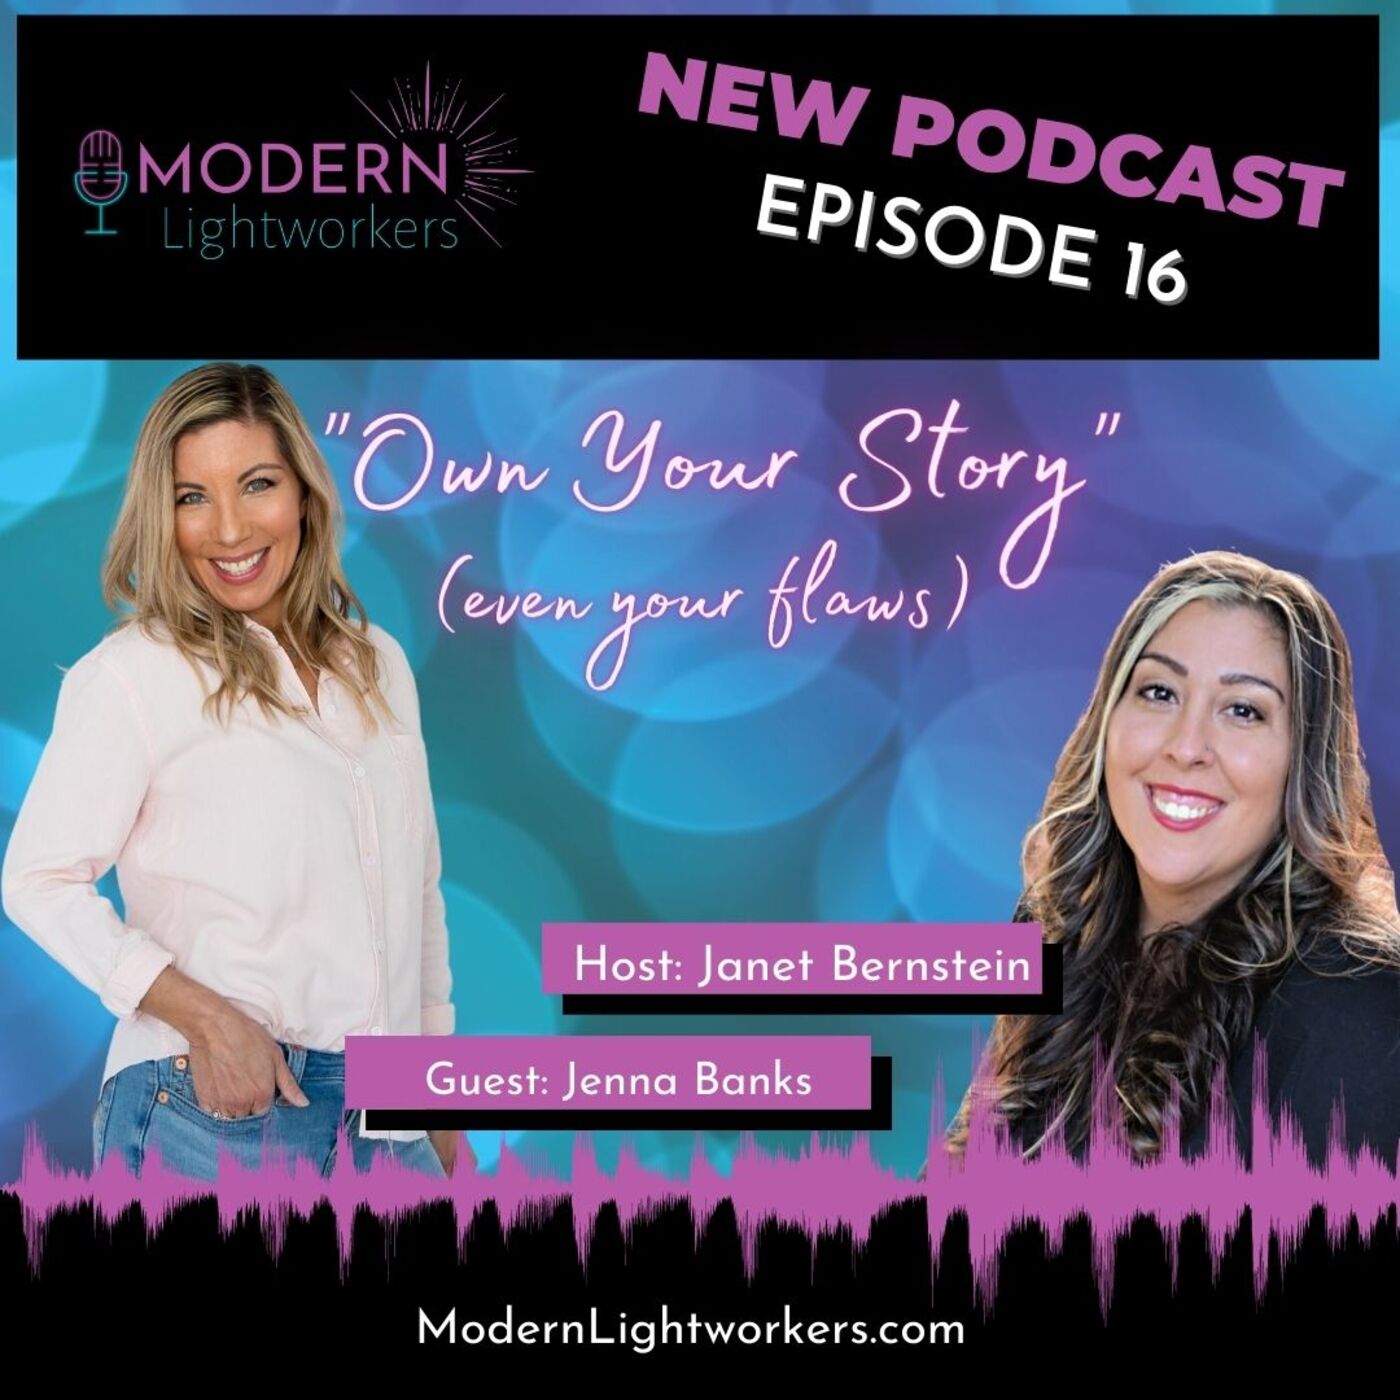 Modern Lightworkers Episode 16: Own Your Story (even your flaws)